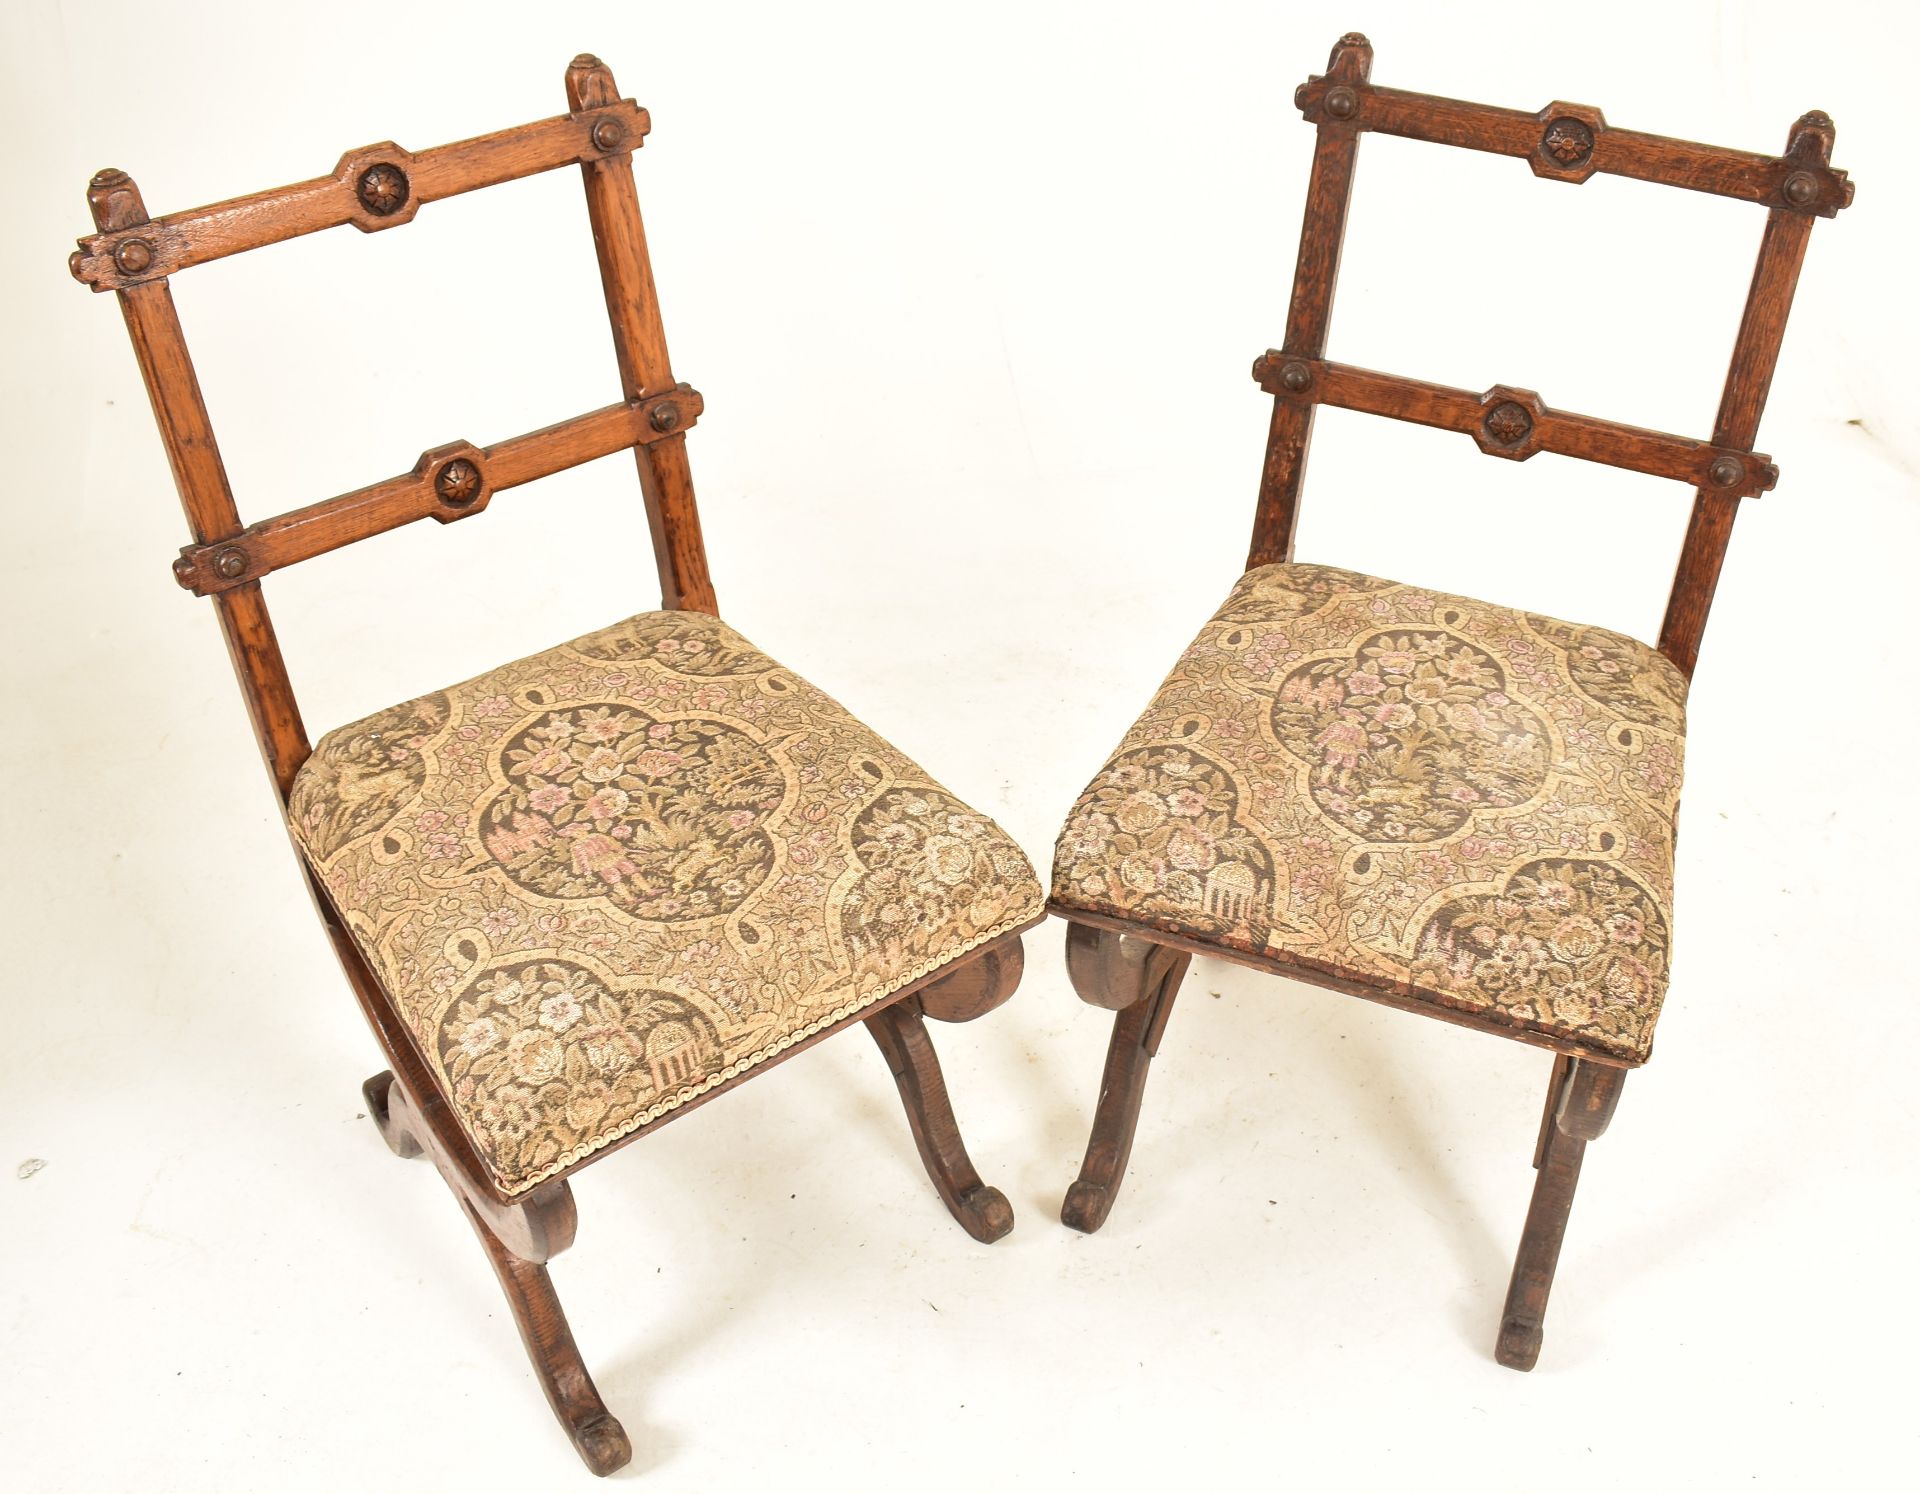 PAIR OF 19TH CENTURY CARVED OAK GOTHIC INSPIRED CHAIRS - Image 2 of 5